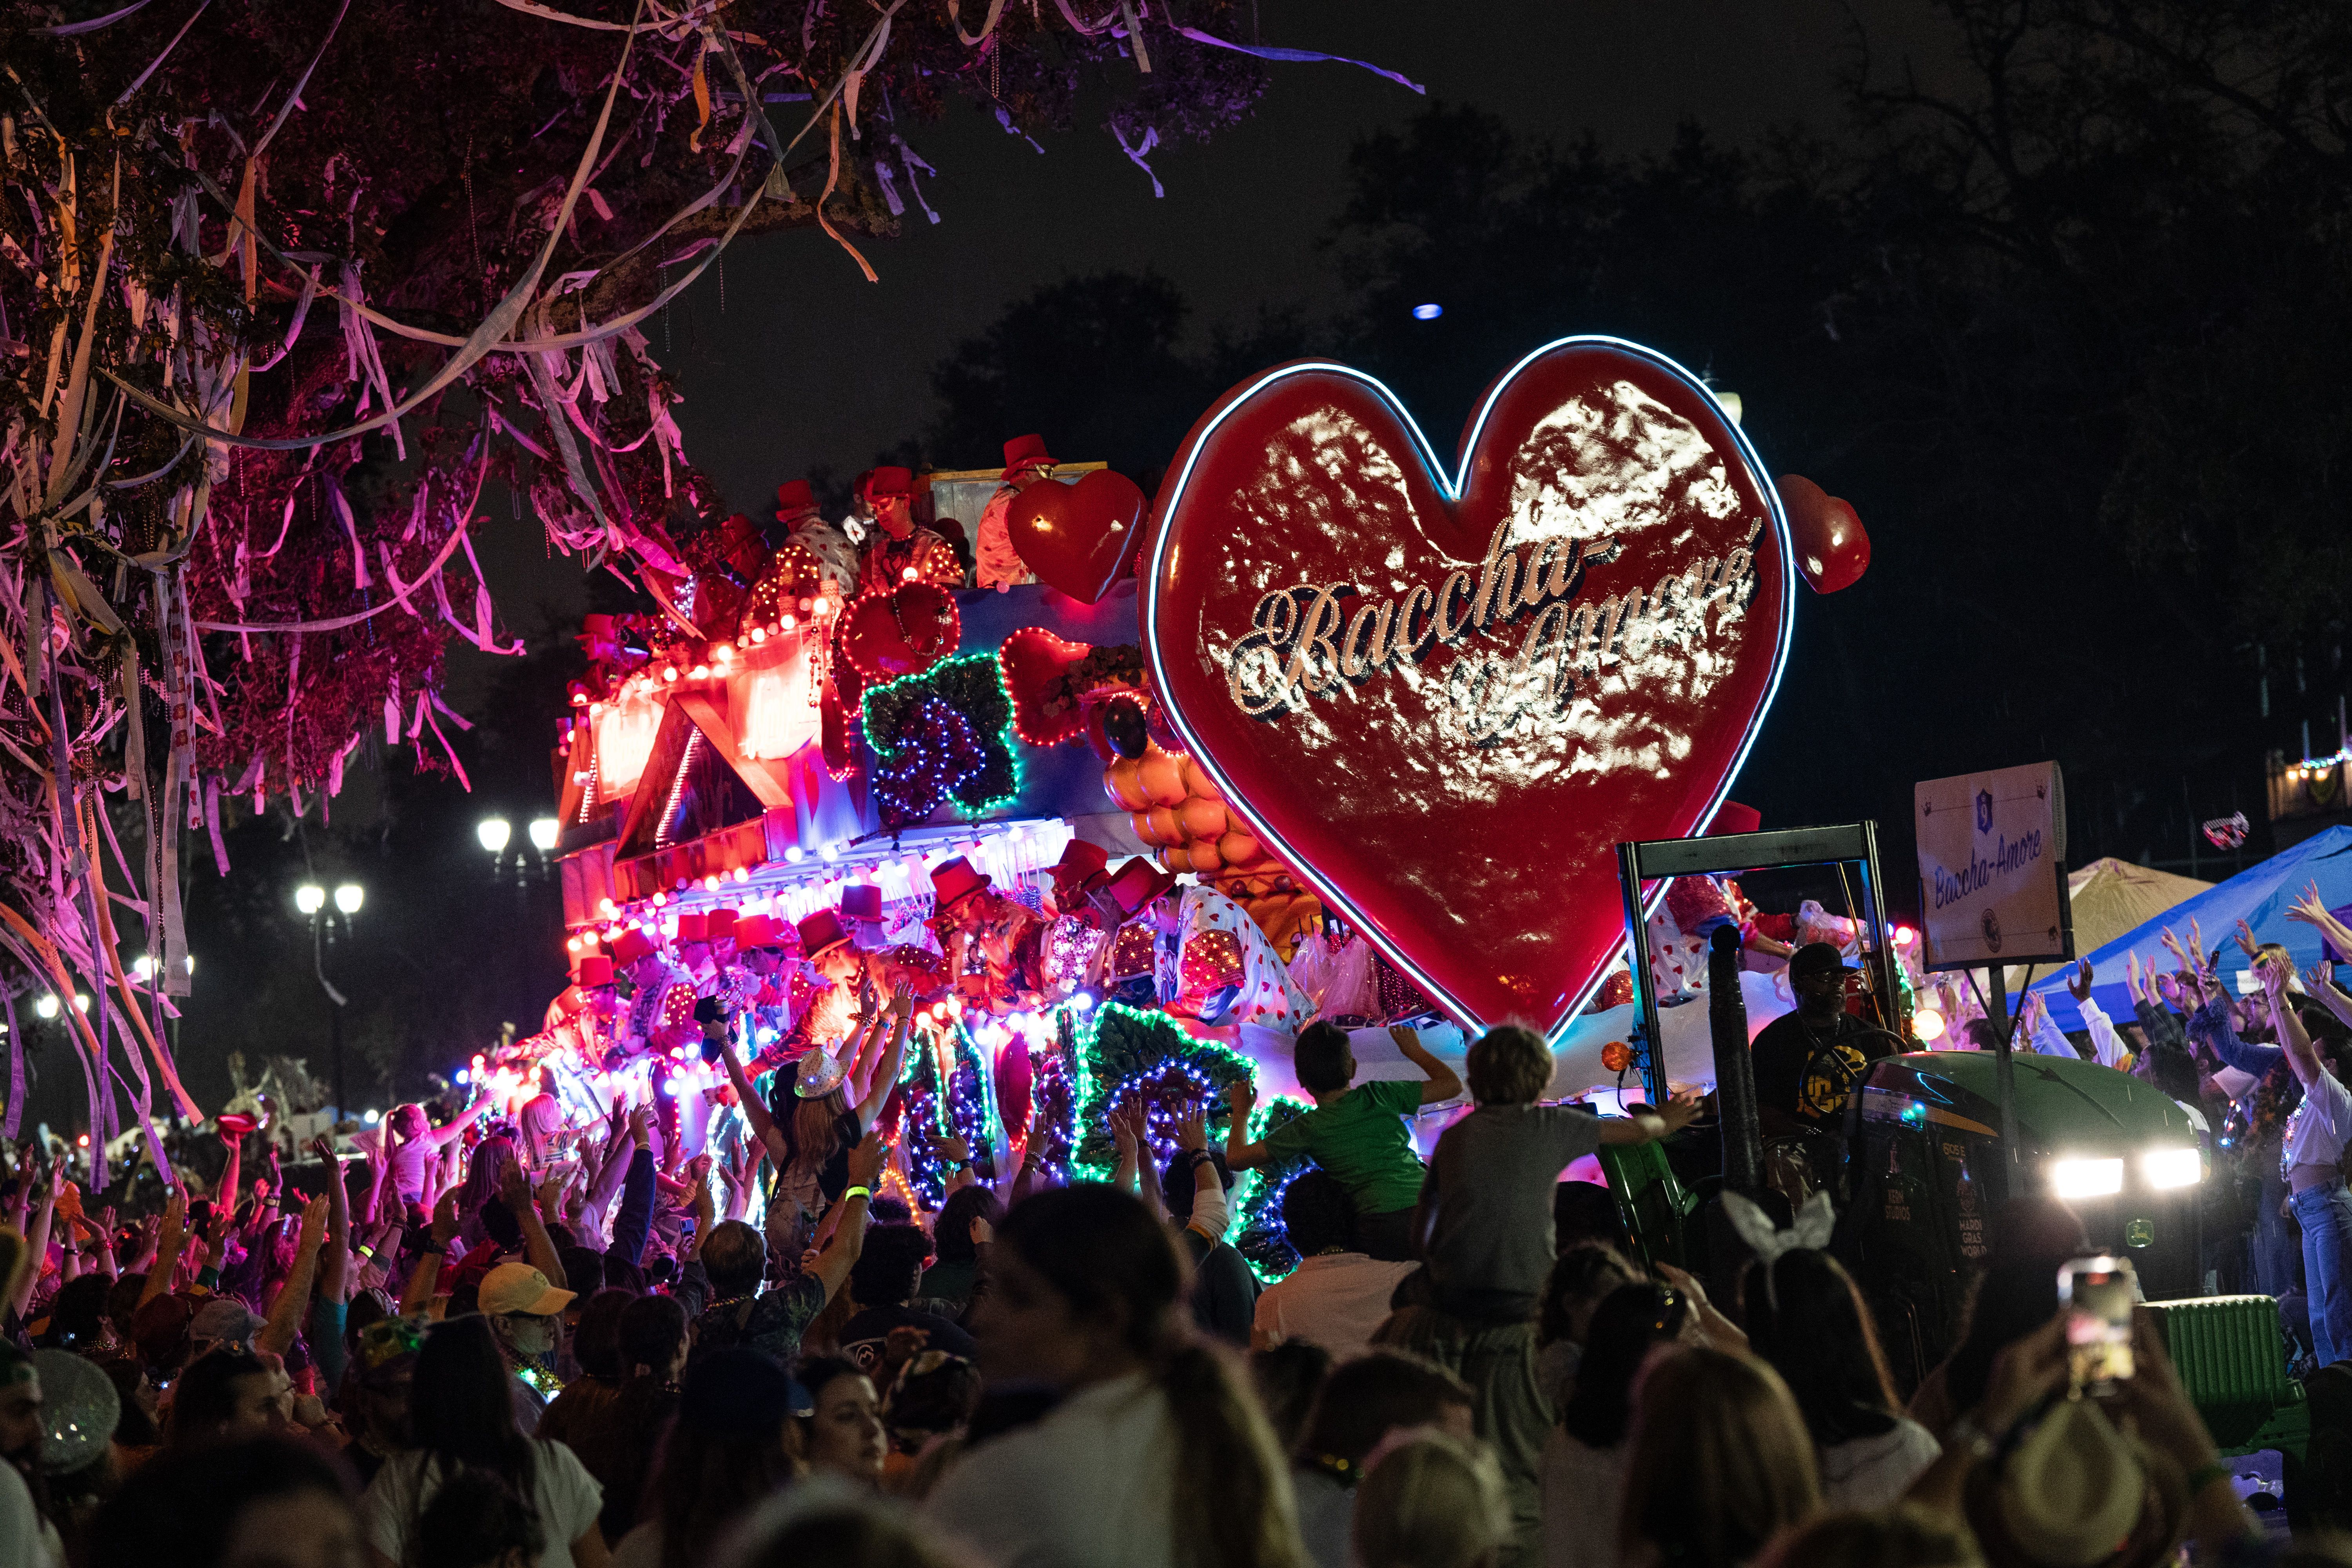 A Mardi Gras float with a large heart on the front comes down the route. The heart says Baccha-Amore.